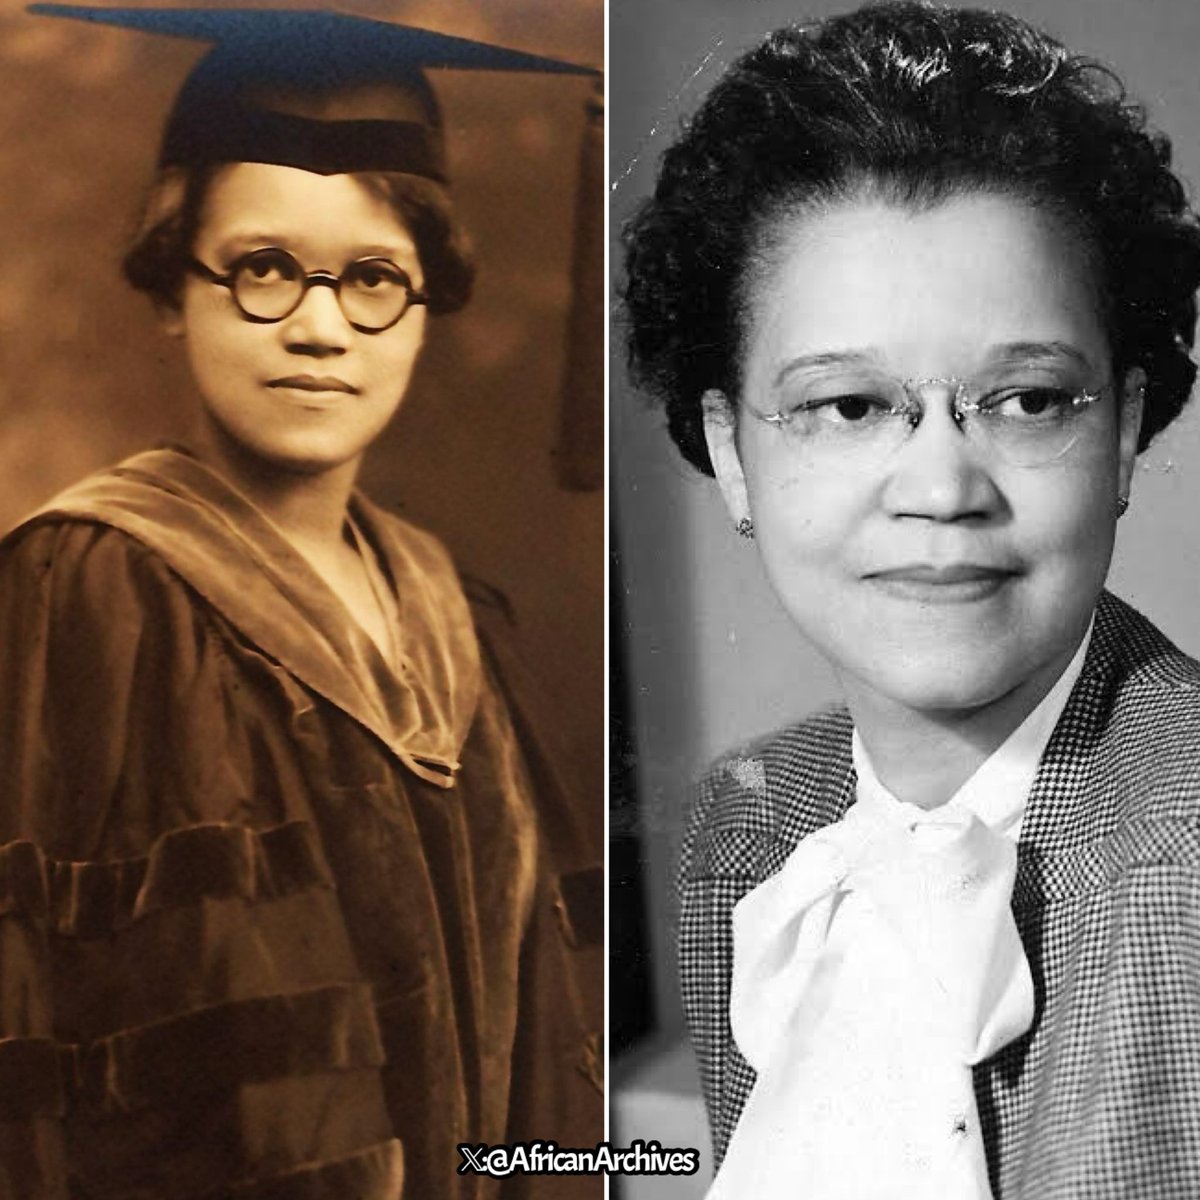 Sadie Alexander, the first black woman economist. She became the first Black woman in the U.S. to earn a doctorate degree in economics in 1921.

Sadie came from a family with a rich history of academic achievement. Her father was the first black American to graduate from the…